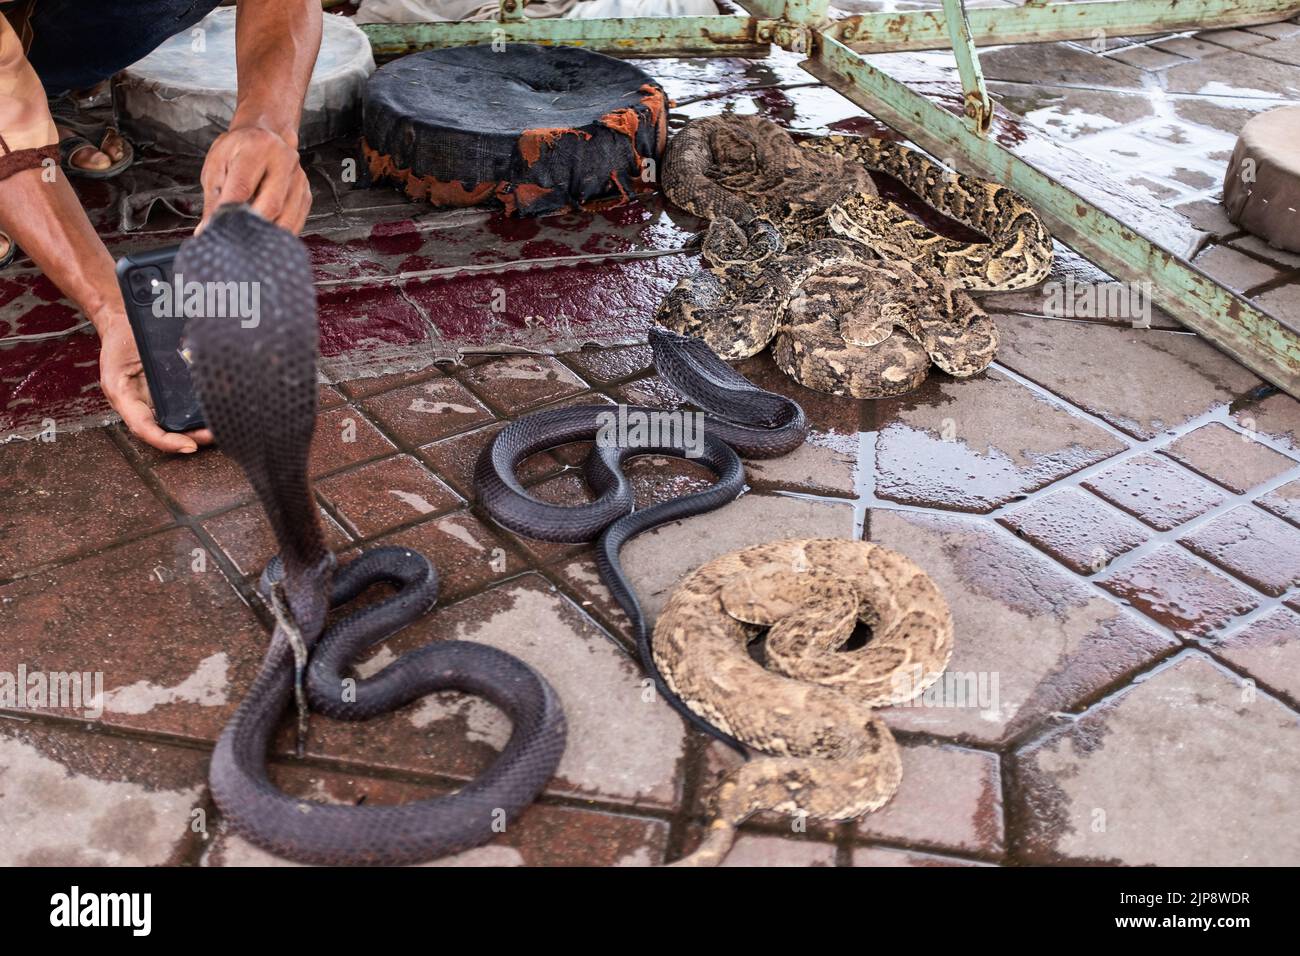 Taking a picture with smart phone of a tamed cobra snake on a touristic place in Marrakesh, Morocco Stock Photo